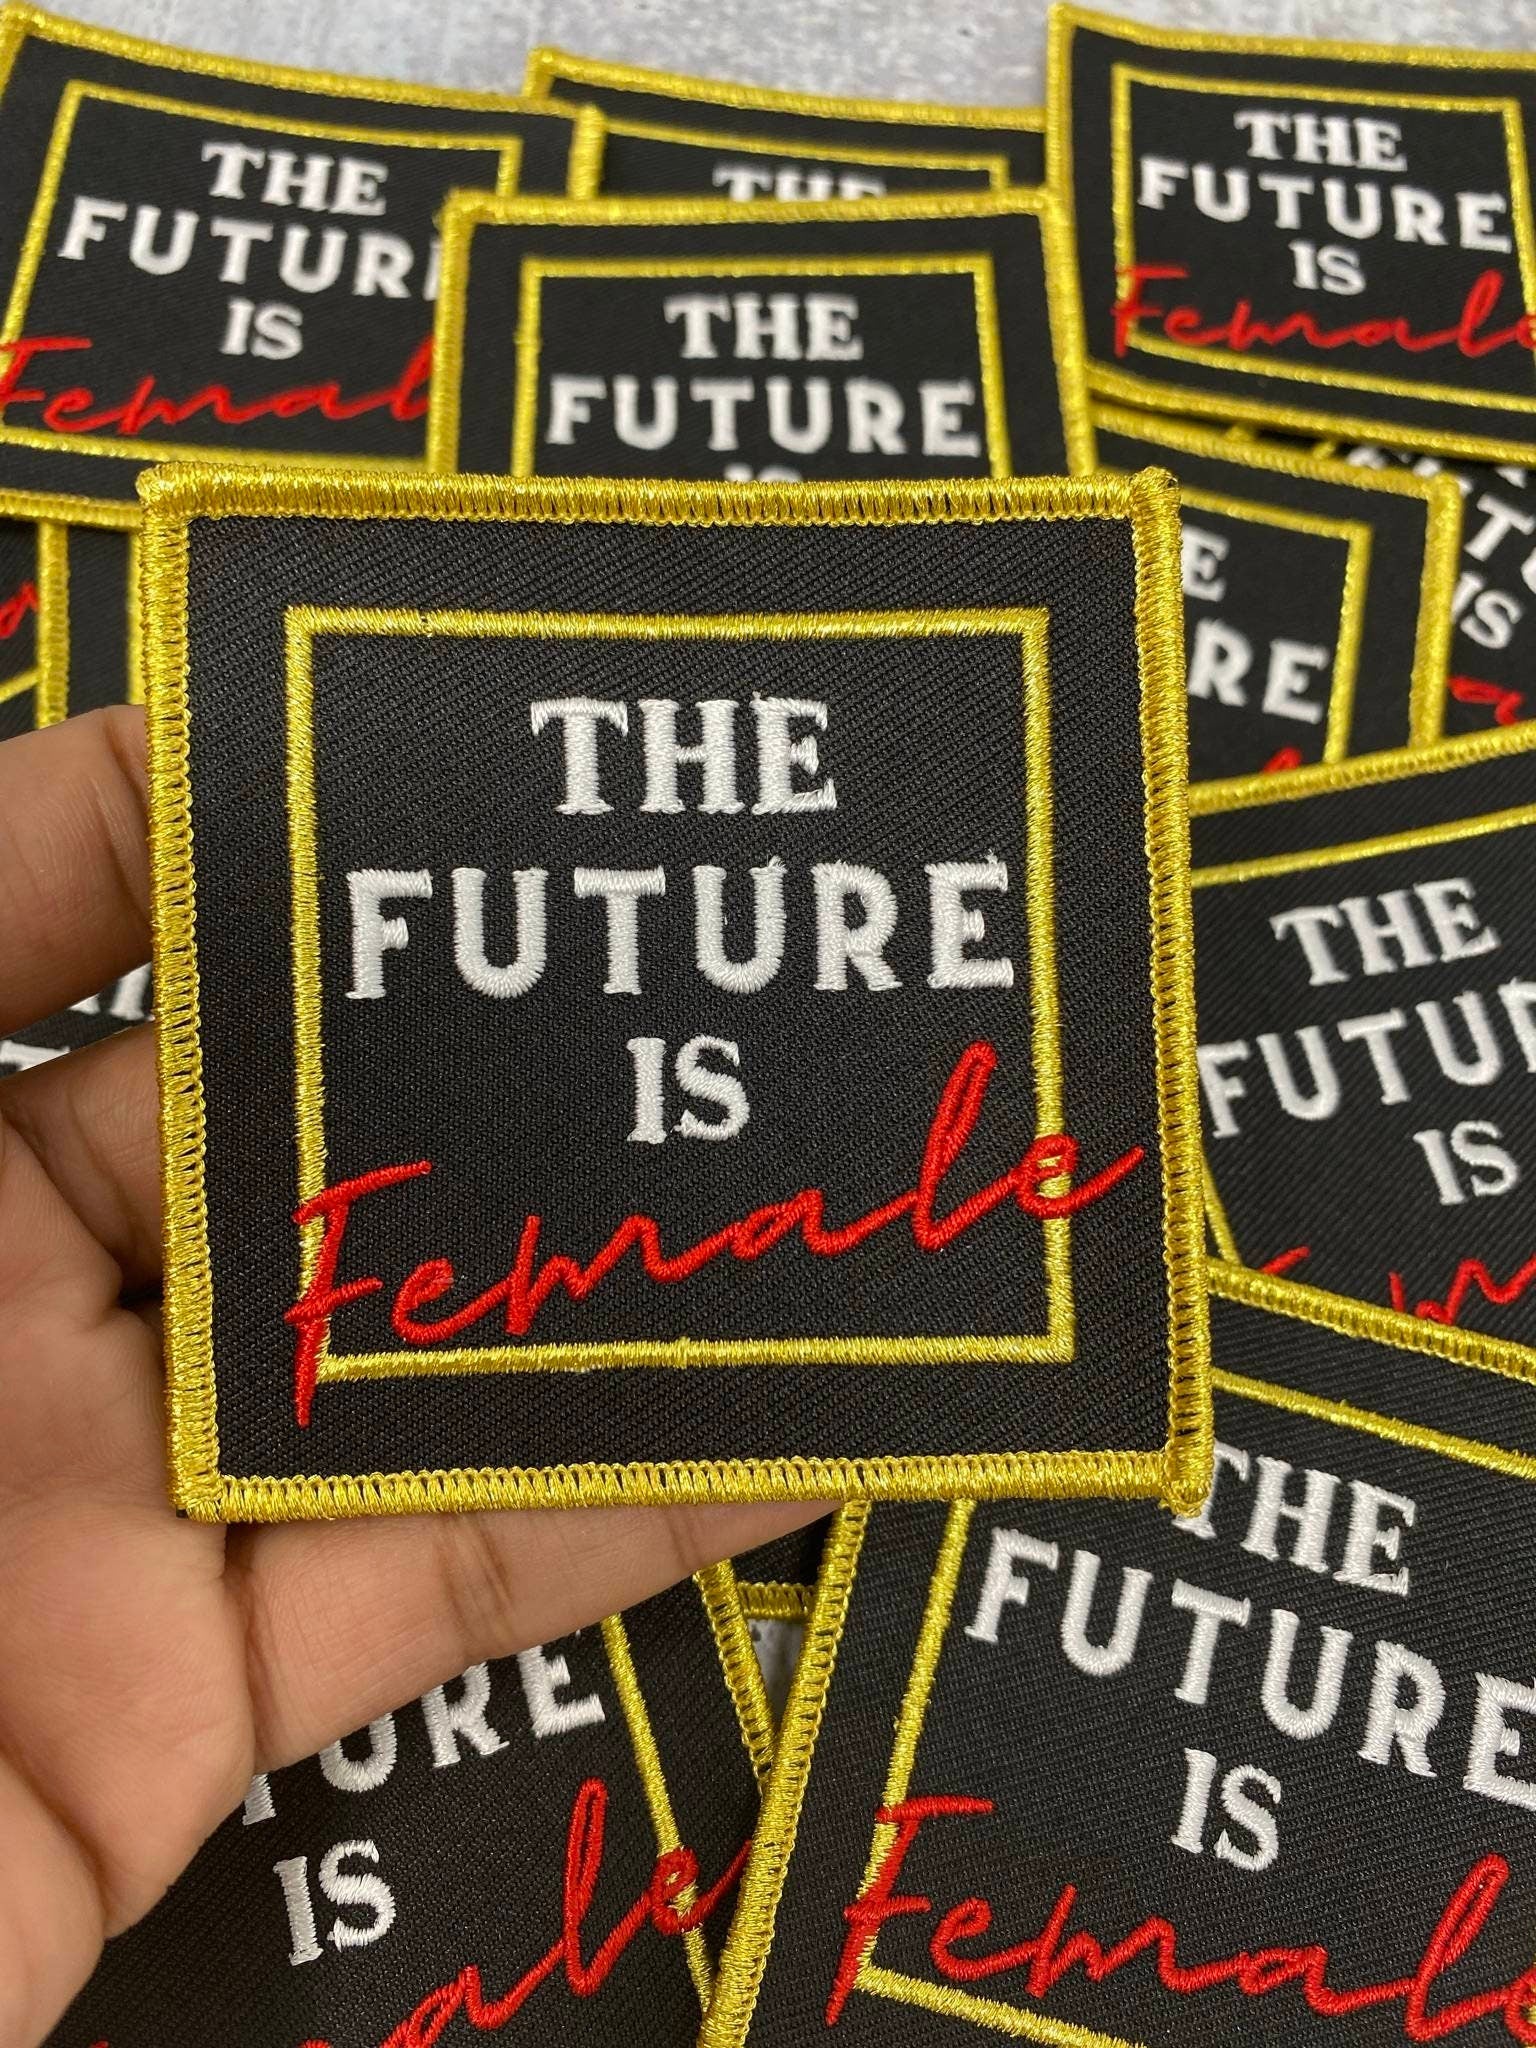 New "The Future is Female" 3"x3" Iron-On Patch, Embroidered Patch for Hats; Applique for Clothing & Accessories, Morale Badge, Feminist Gift